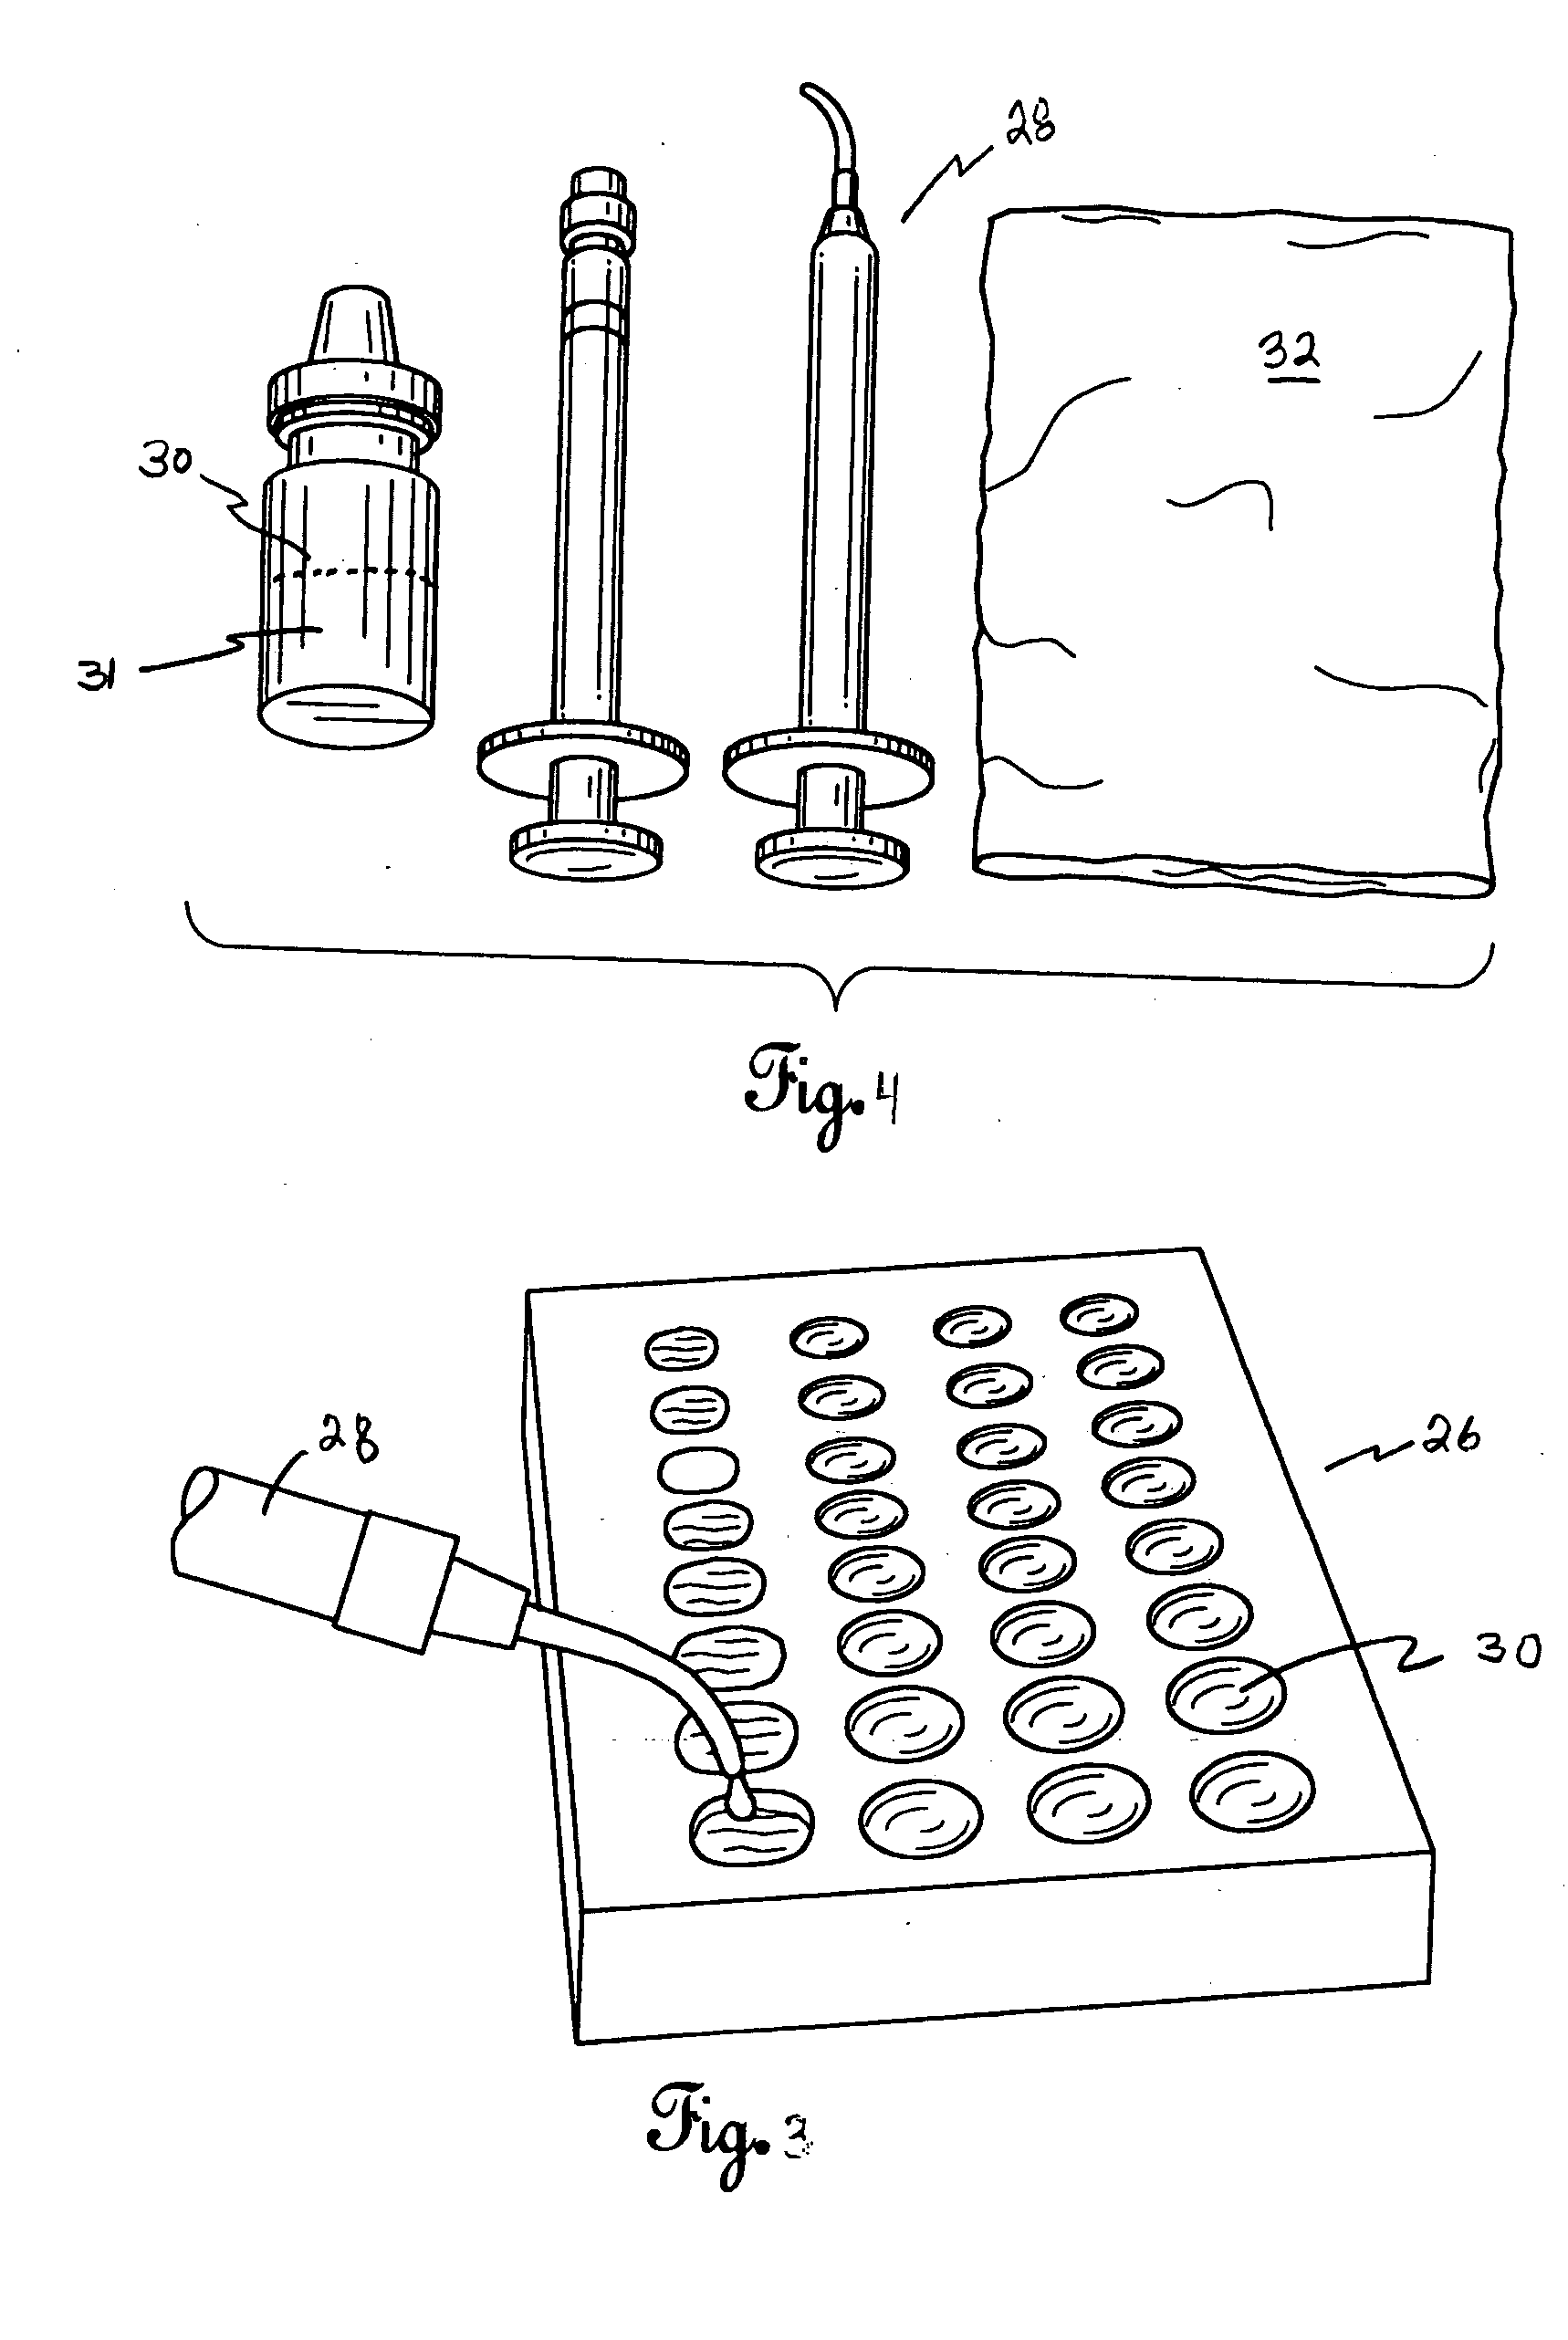 Fishing hook structure constructed from light curable acrylic resin and the method for making the same